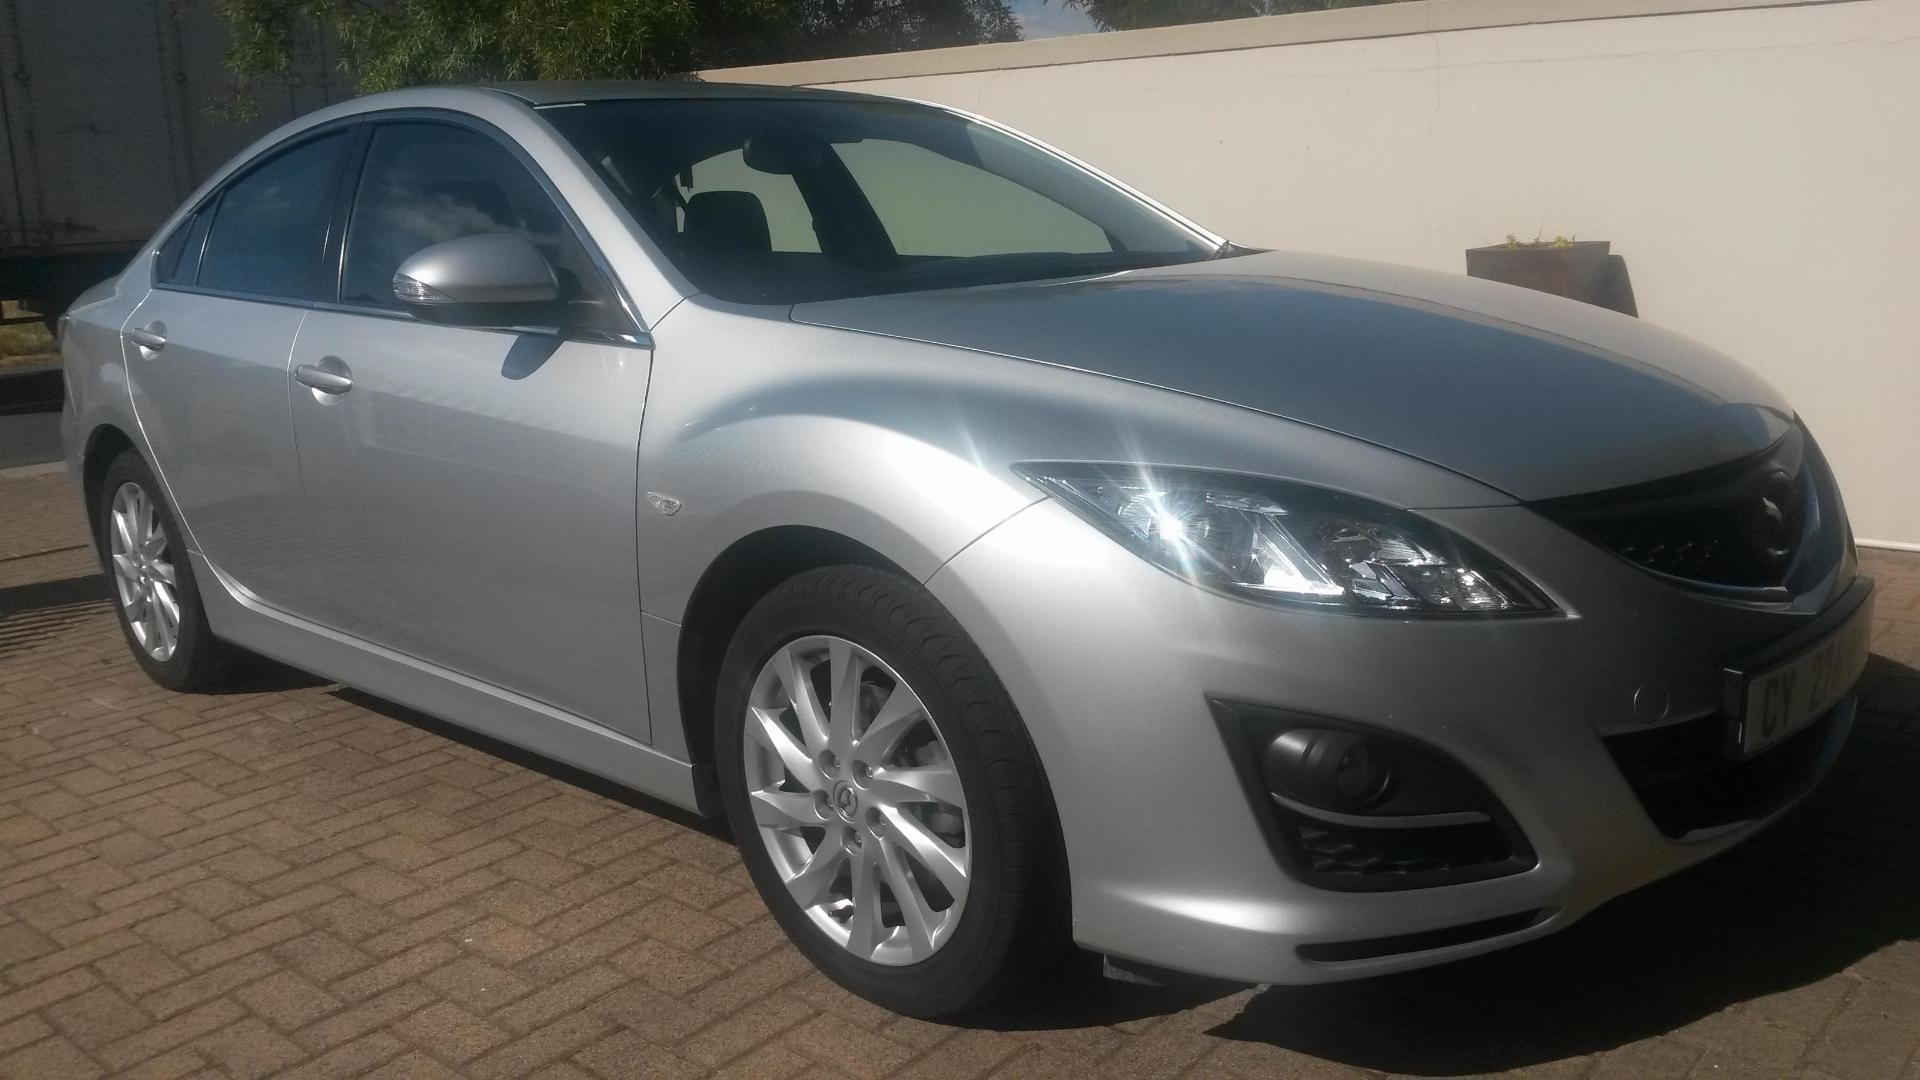 Used Mazda 6 2.0 Active (FACELIFT) 2010 on auction PV1009403